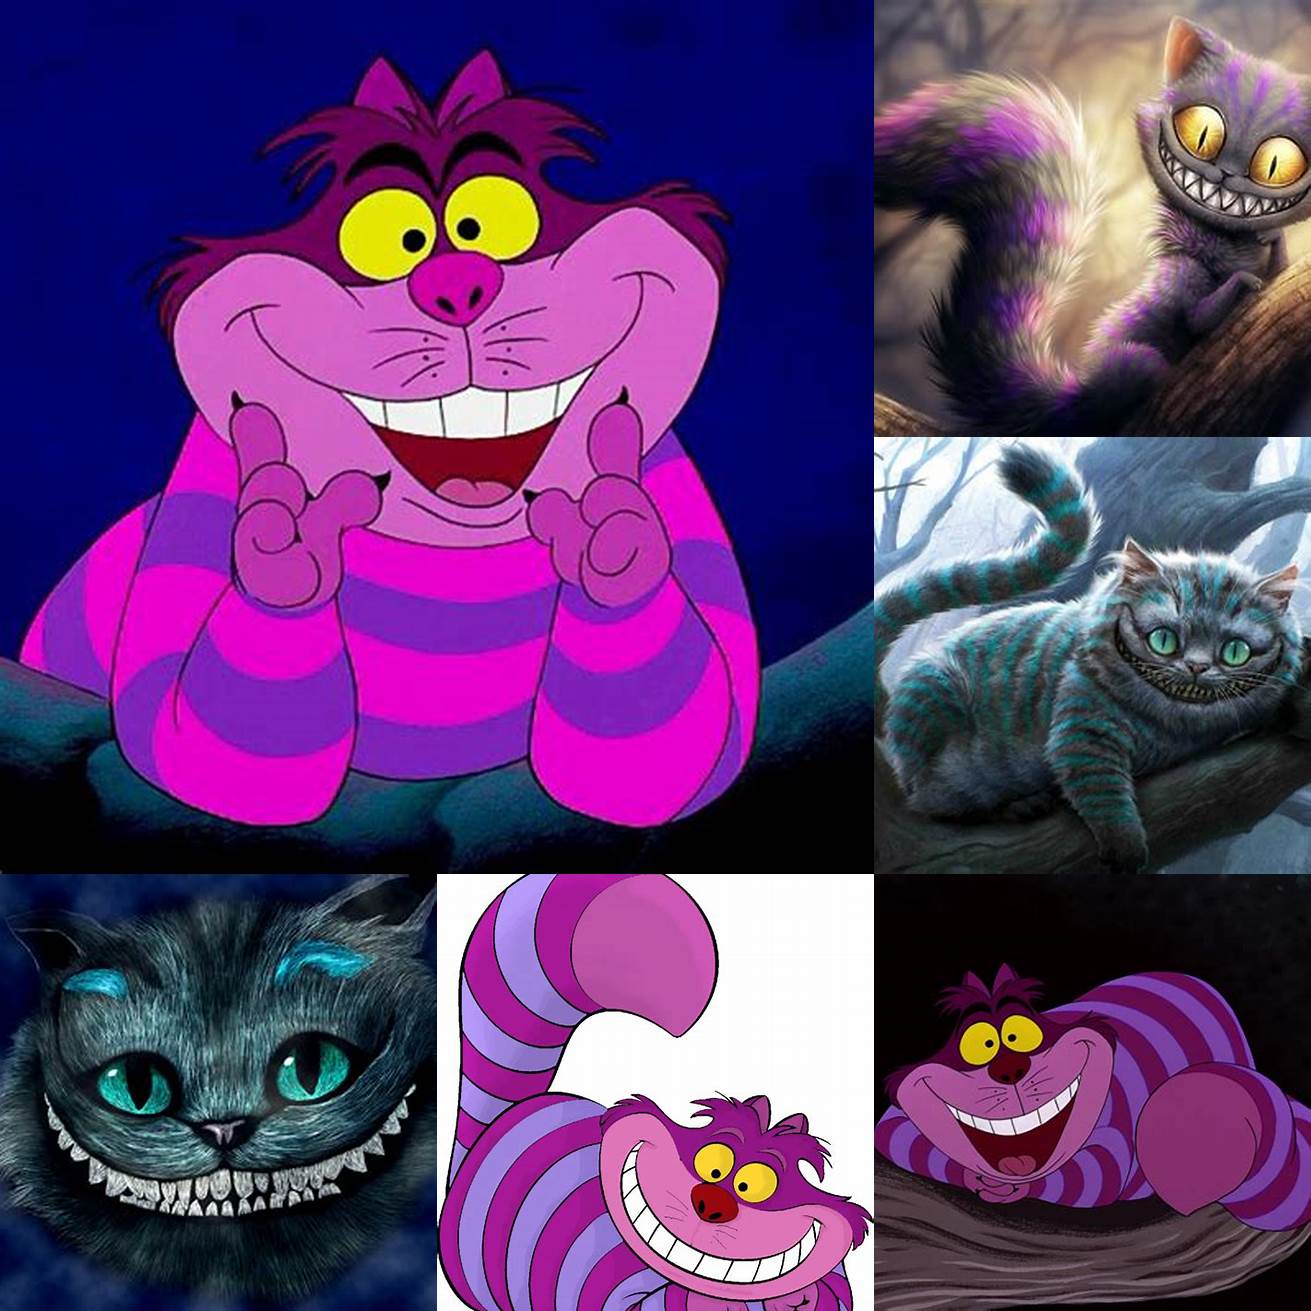 The Cheshire Cat from Alice in Wonderland